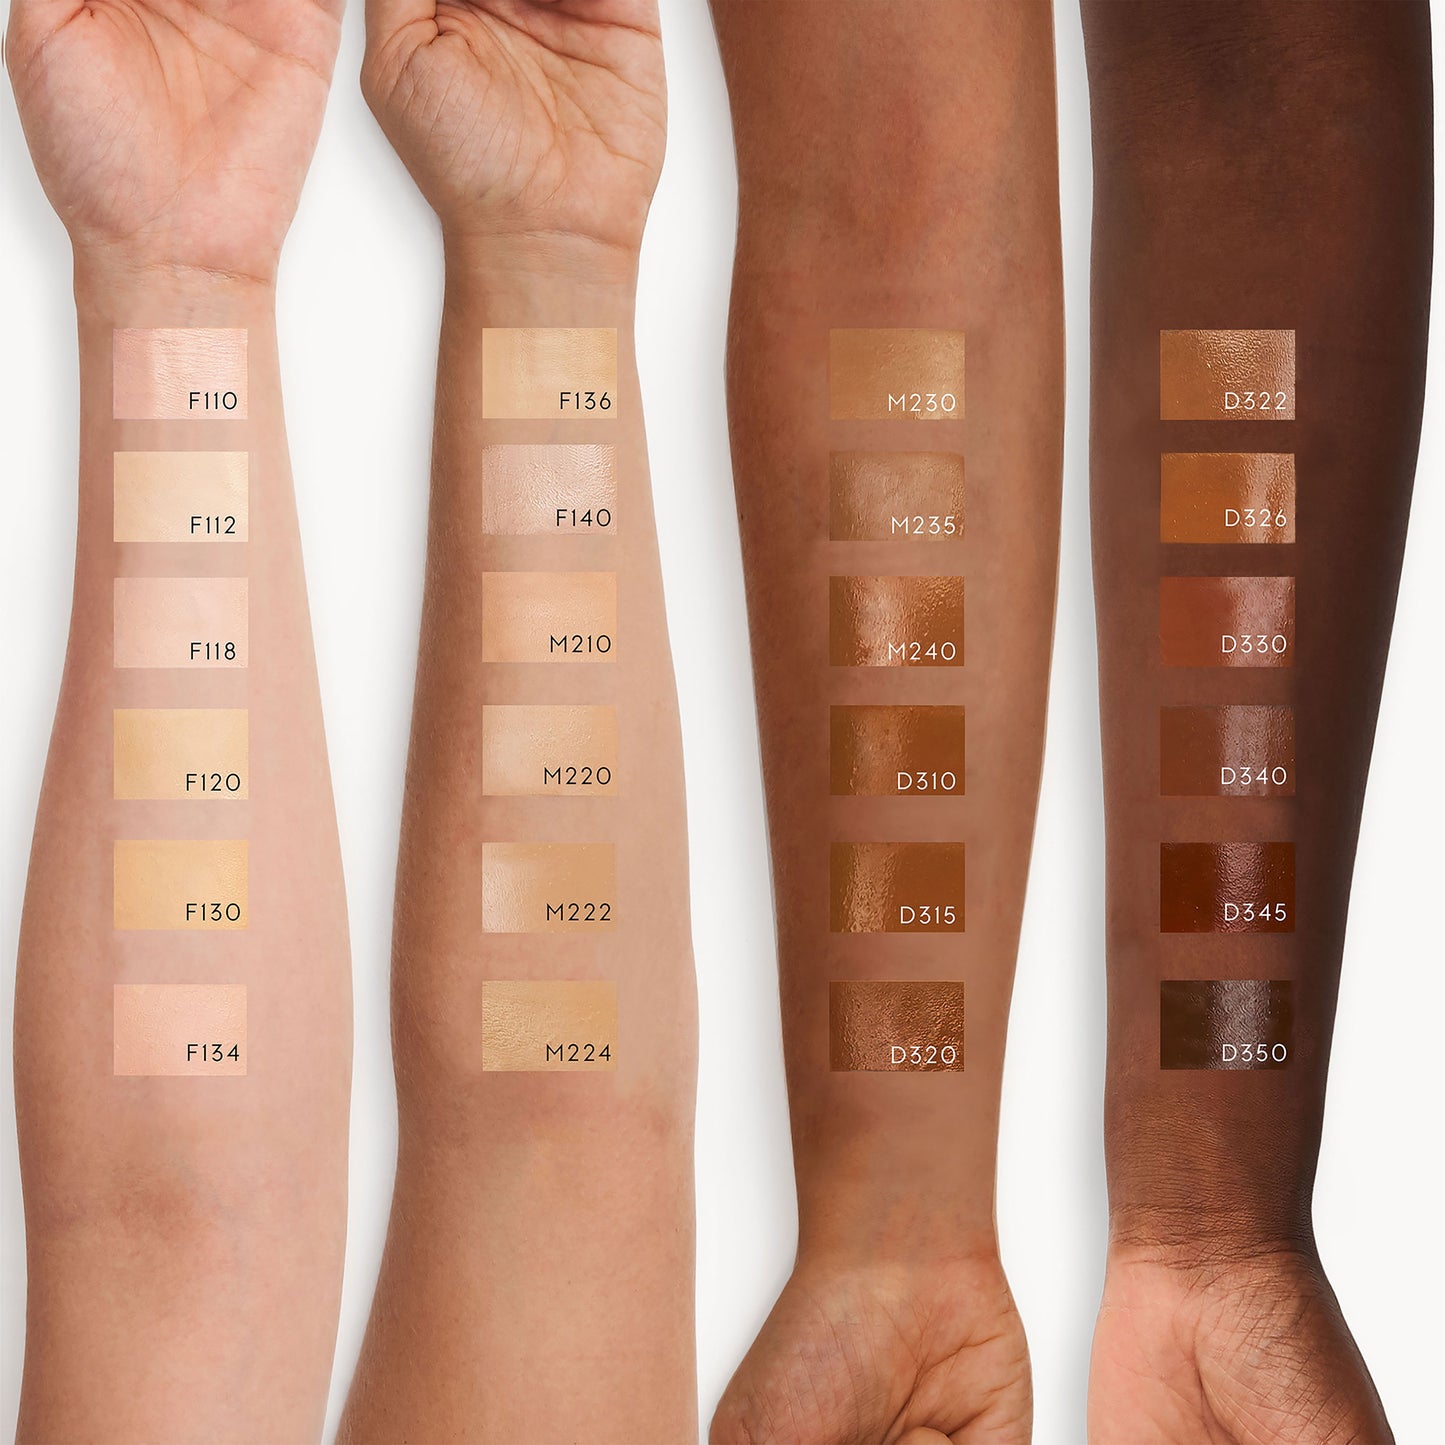 Four arms of different skin tones all with a swatch of cream foundation from darkest to lightest shade. D320 is the darkest shade on the second-deepest skin tone.  